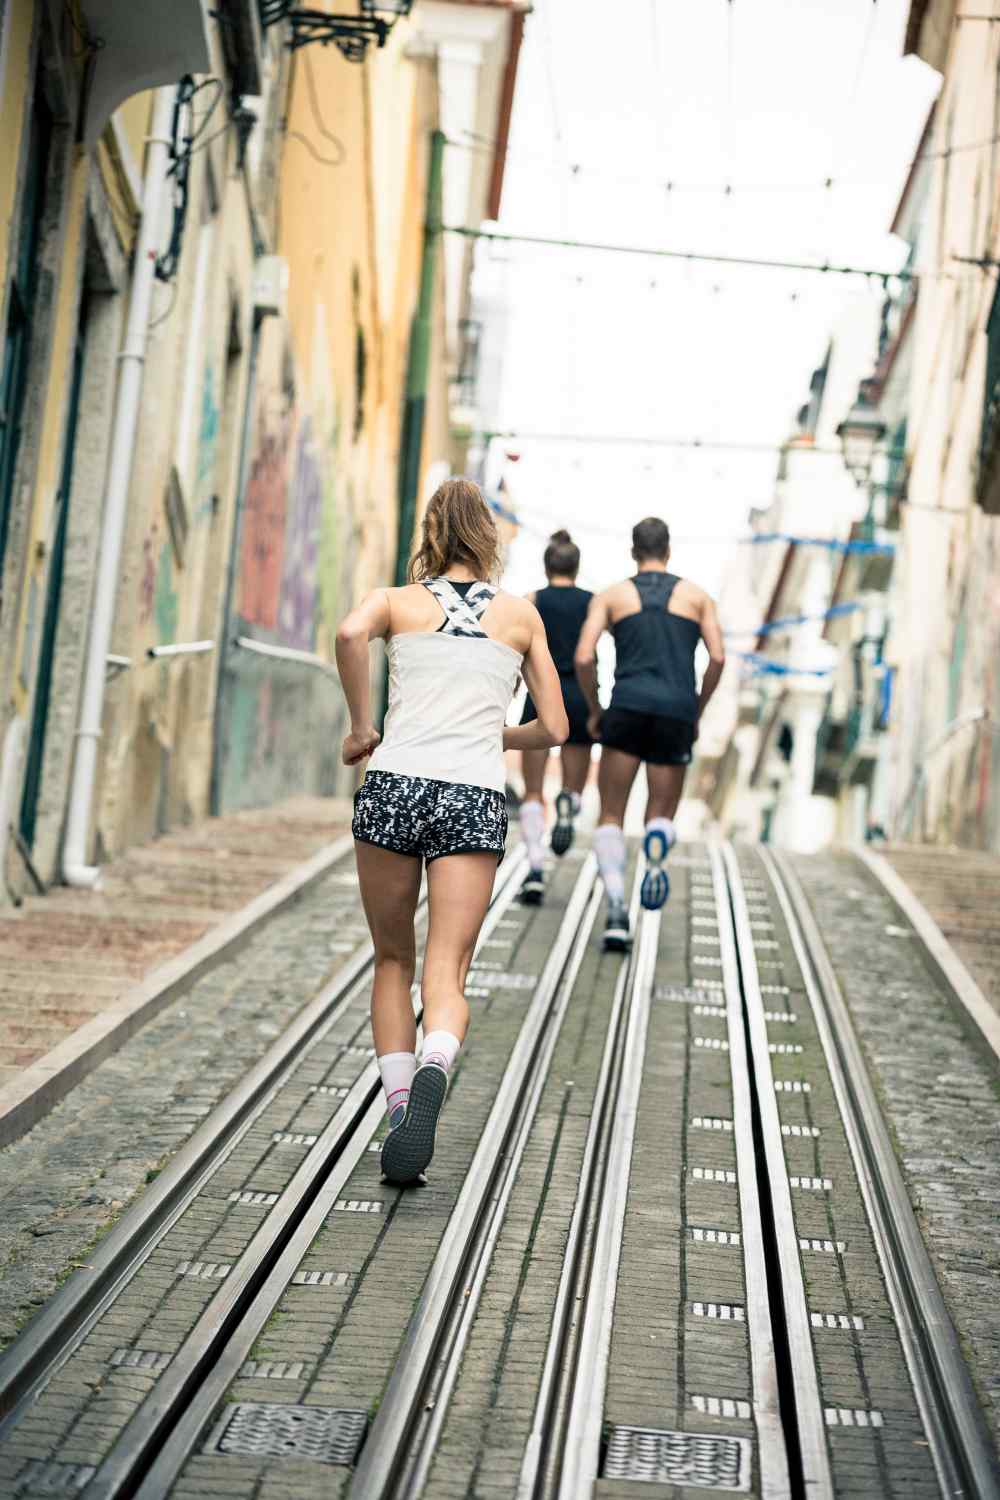 Two runners and a runner run a tram line in a city